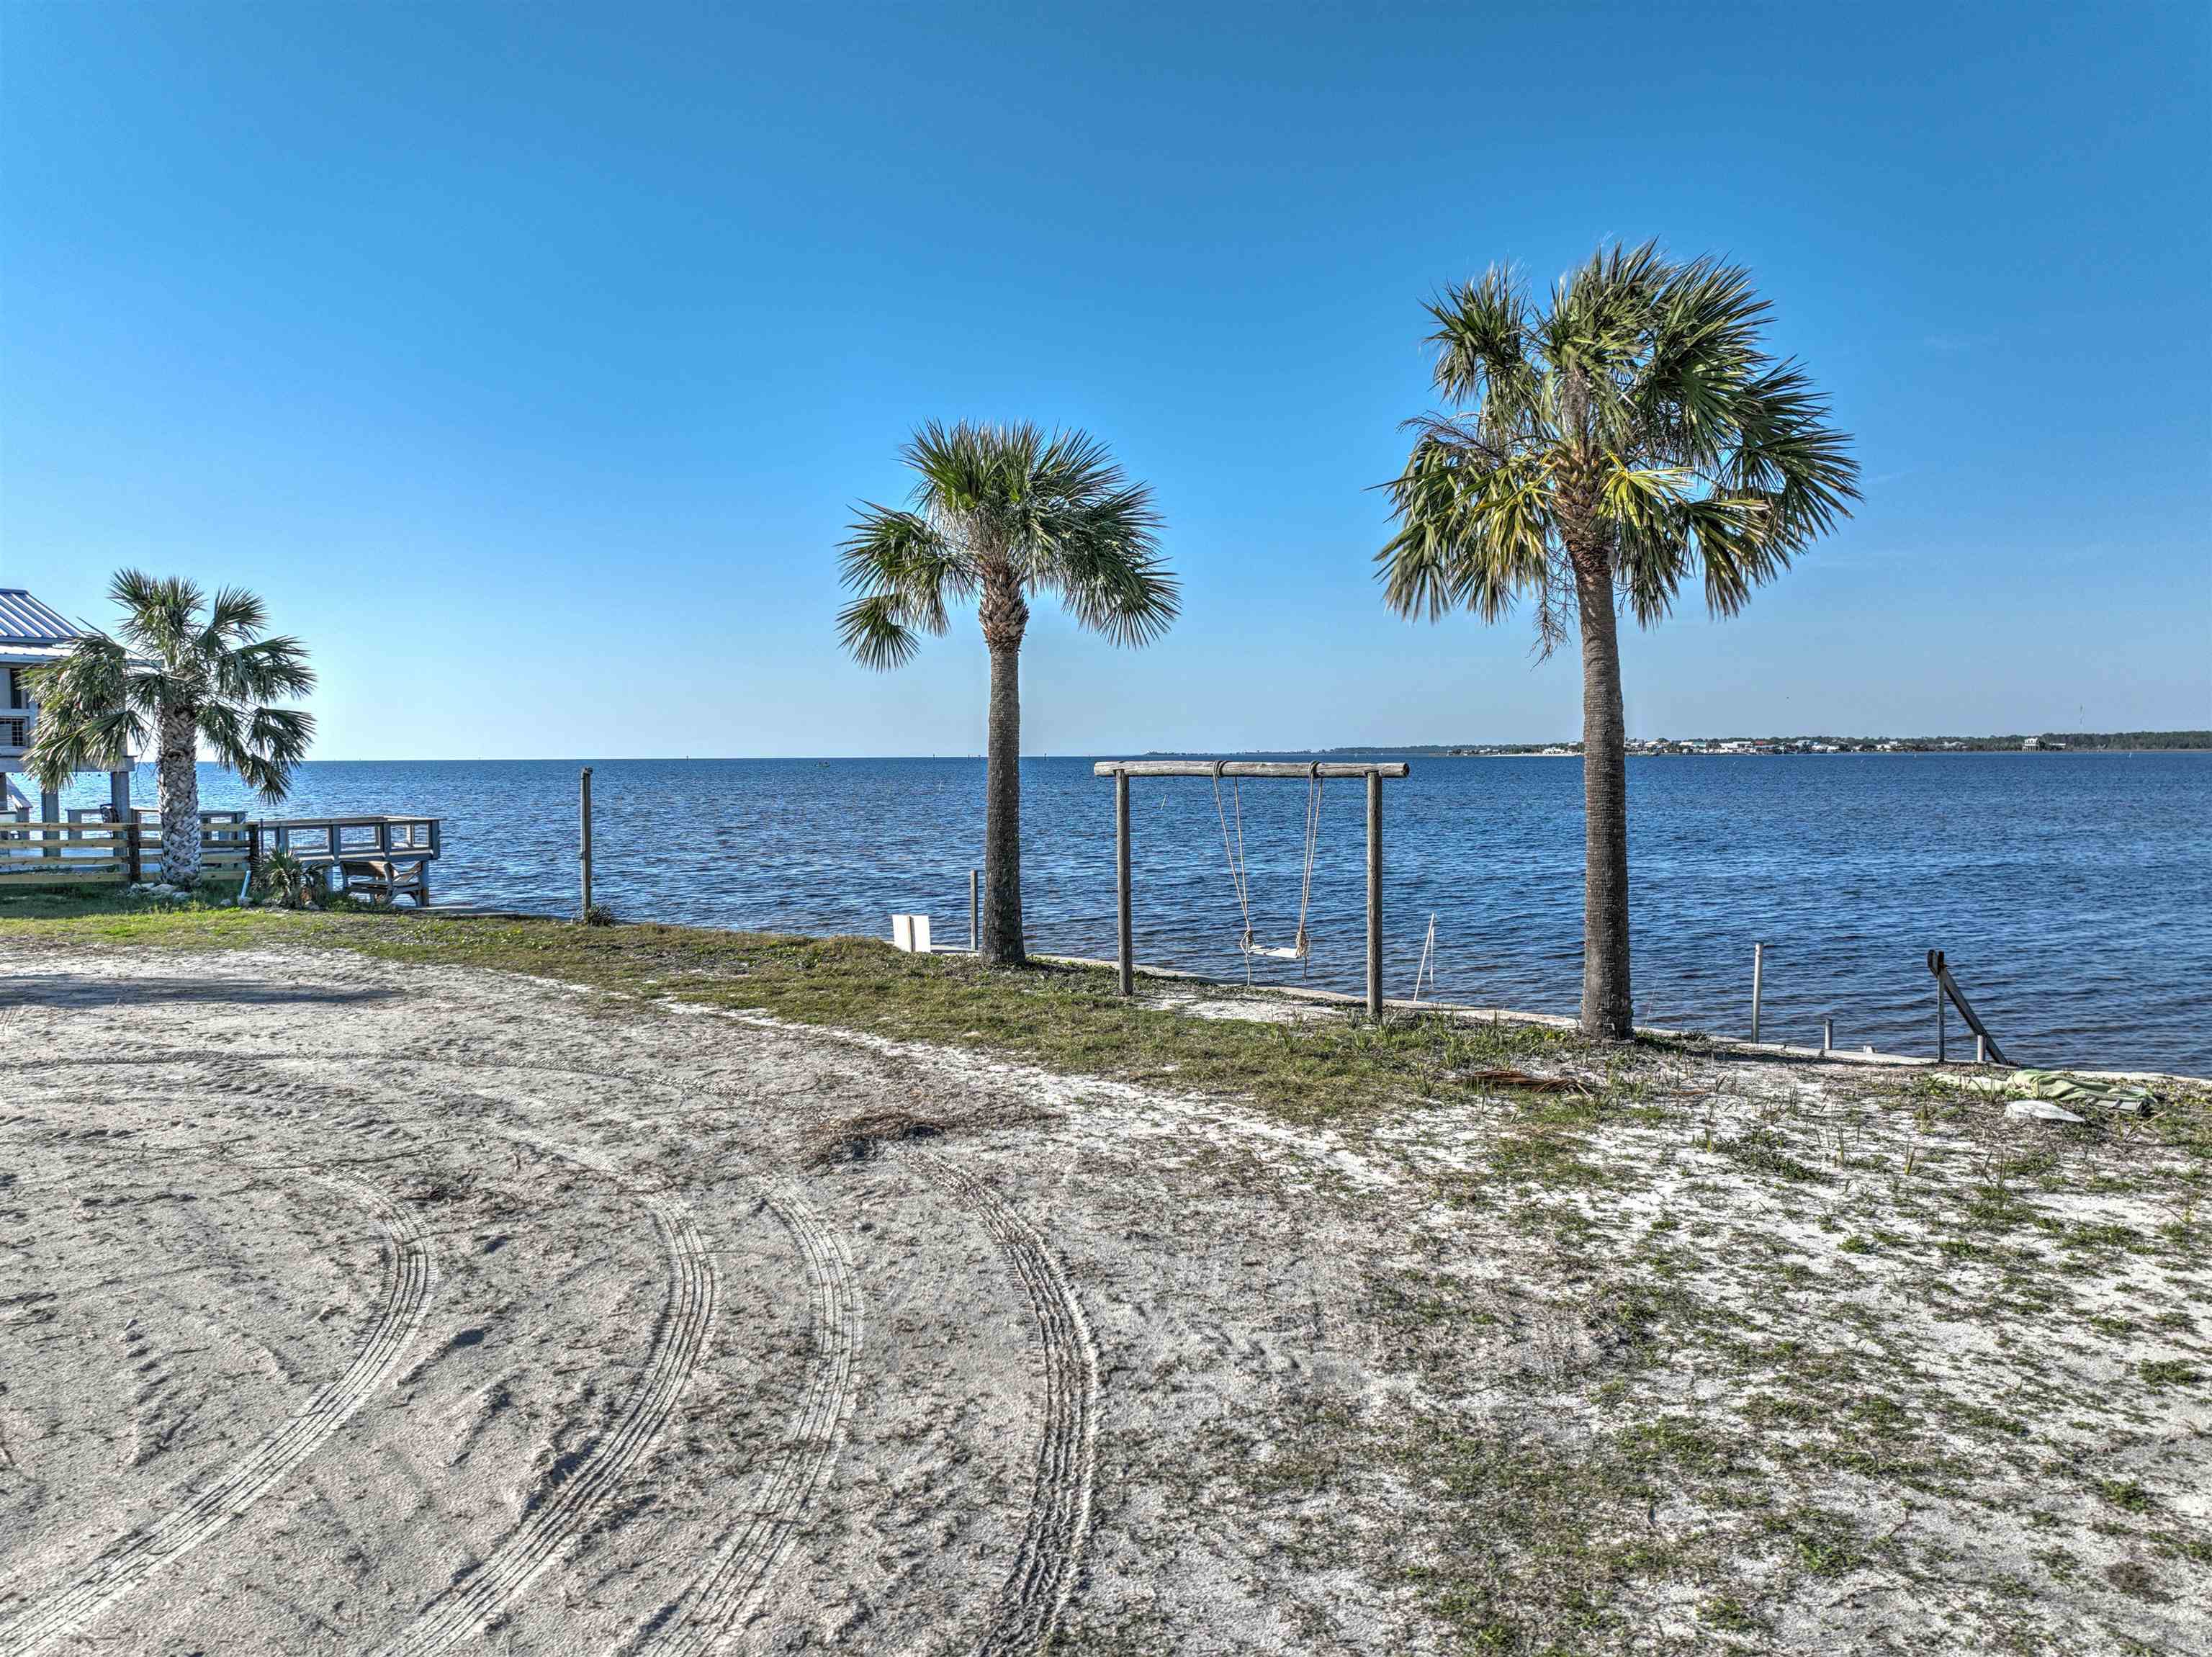 21865 Gulfview,PERRY,Florida 32348-6666,Lots and land,Gulfview,368936